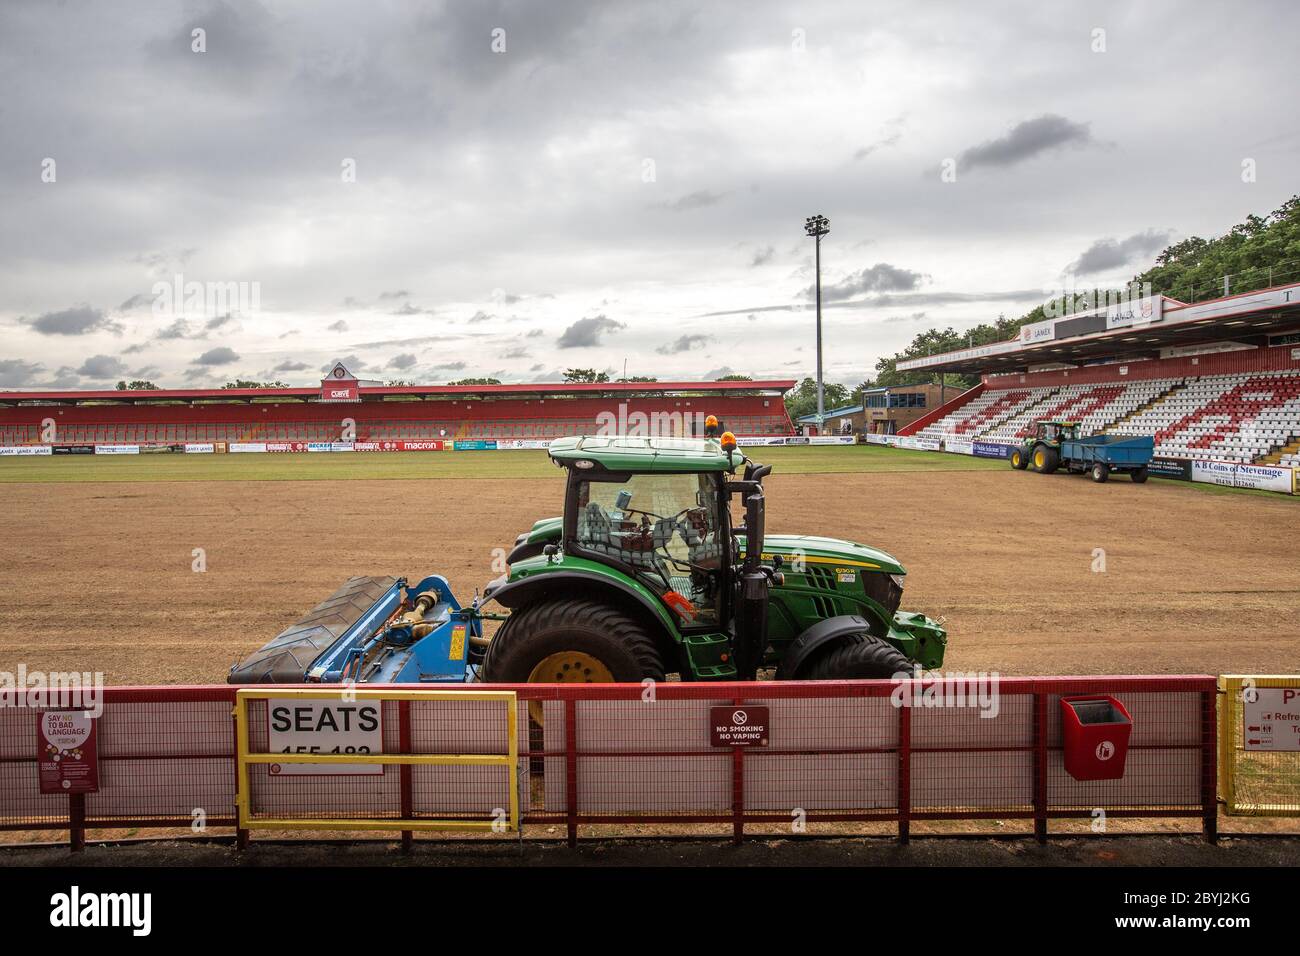 Tractor on football / soccer pitch at sports ground during end of season work by grounds staff relaying turf. Stock Photo